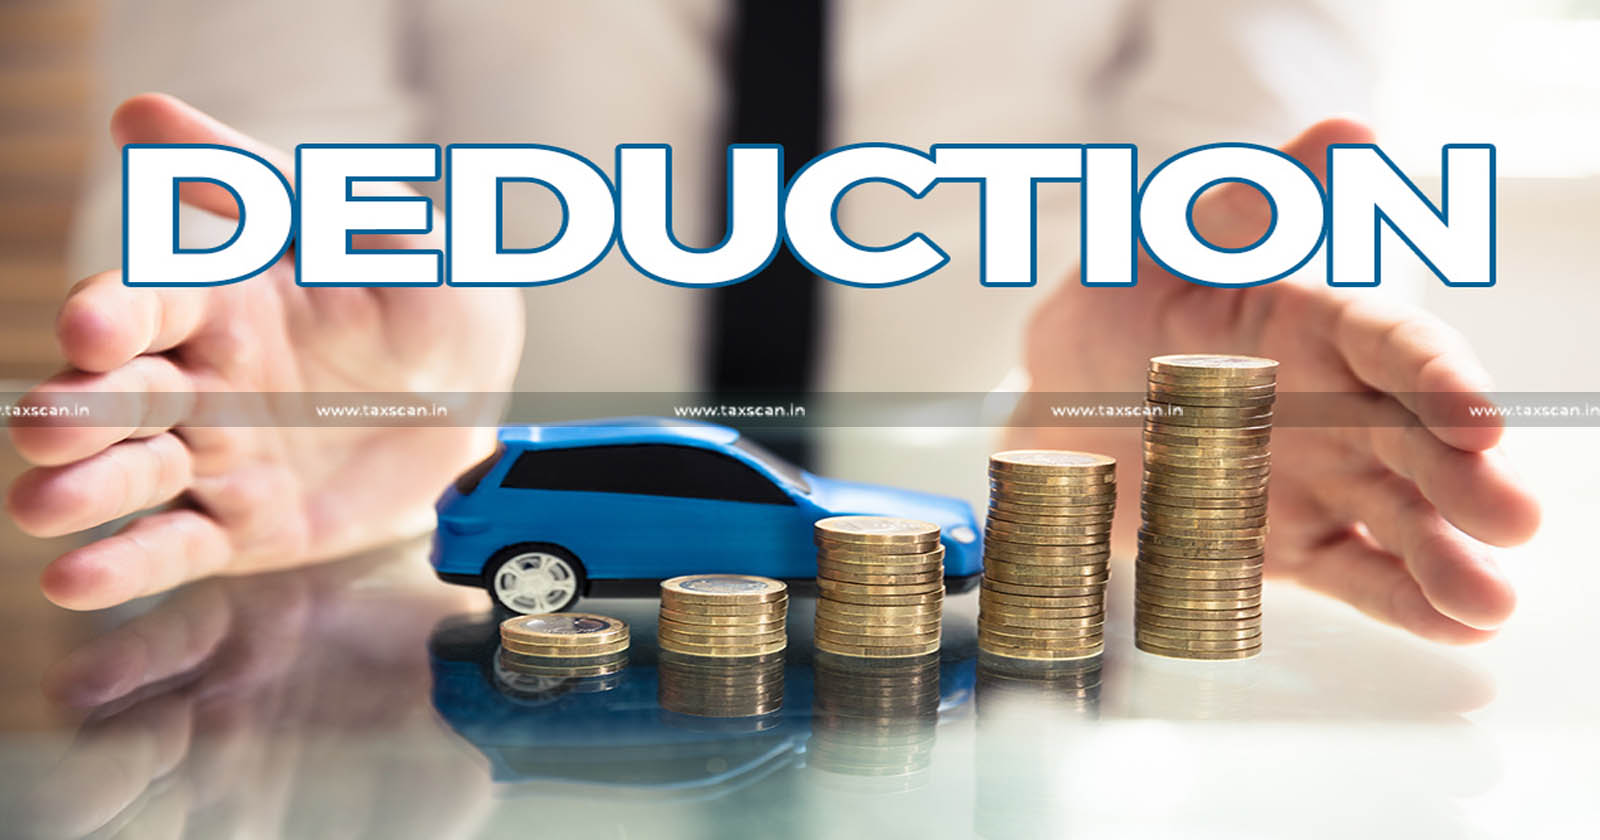 deduction-under-chapter-6a-of-income-tax-act-loan-deduction-under